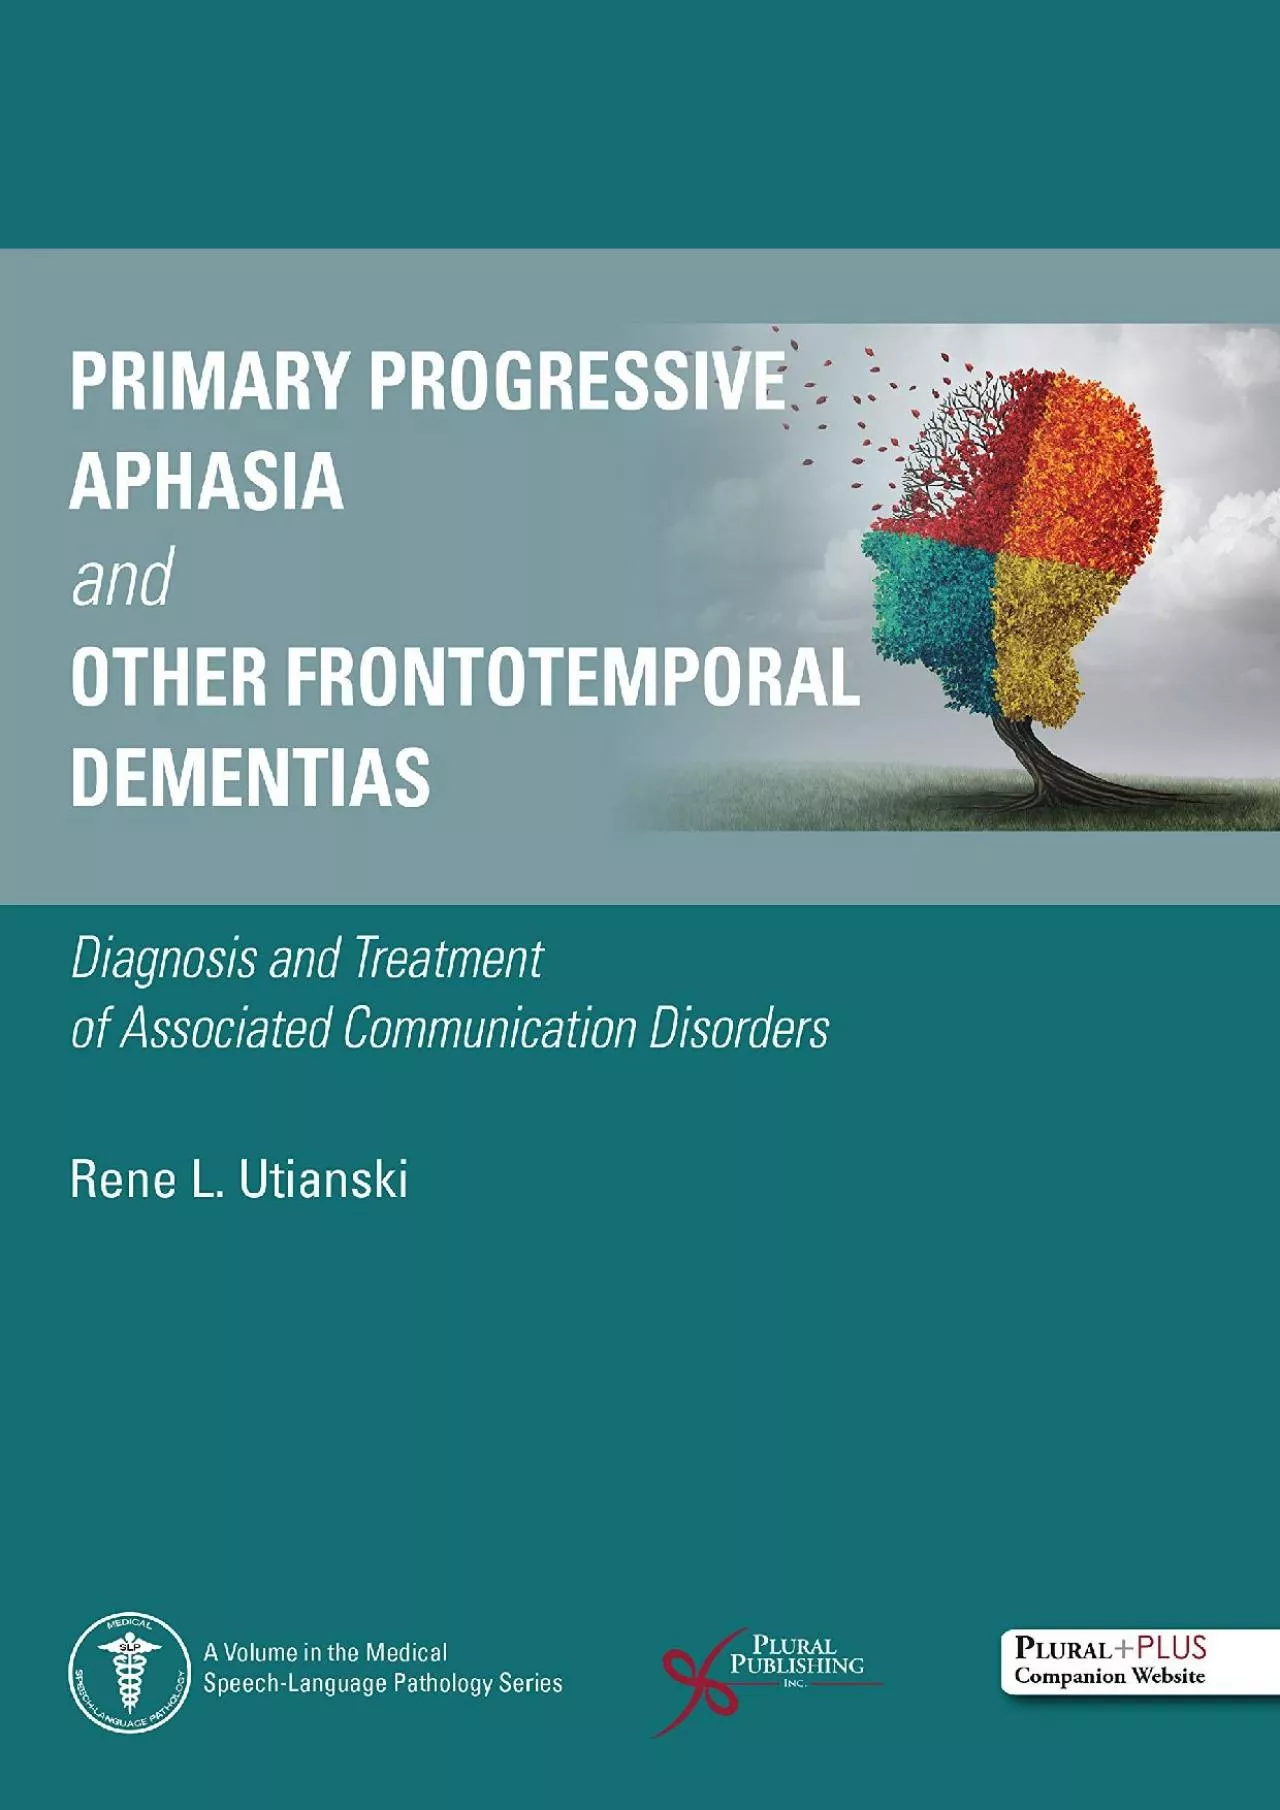 (READ)-Primary Progressive Aphasia and Other Frontotemporal Dementias: Diagnosis and Treatment